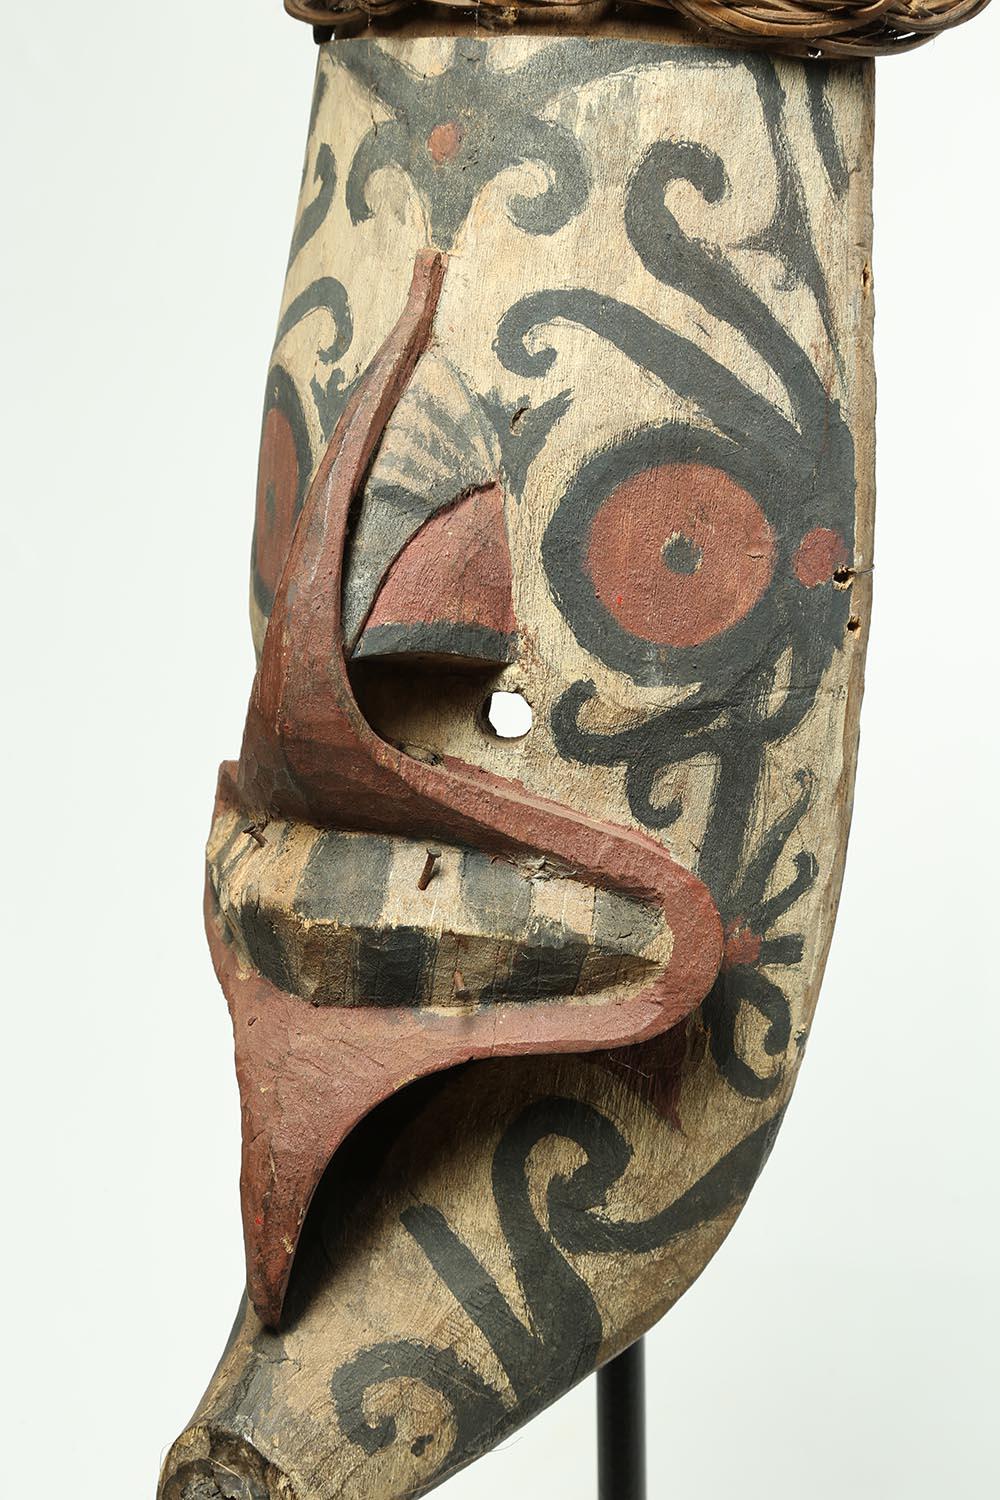 Indonesian Tribal Wood and Pigment Dayak Hudoq Mask on Stand, Early 20th Century Borneo